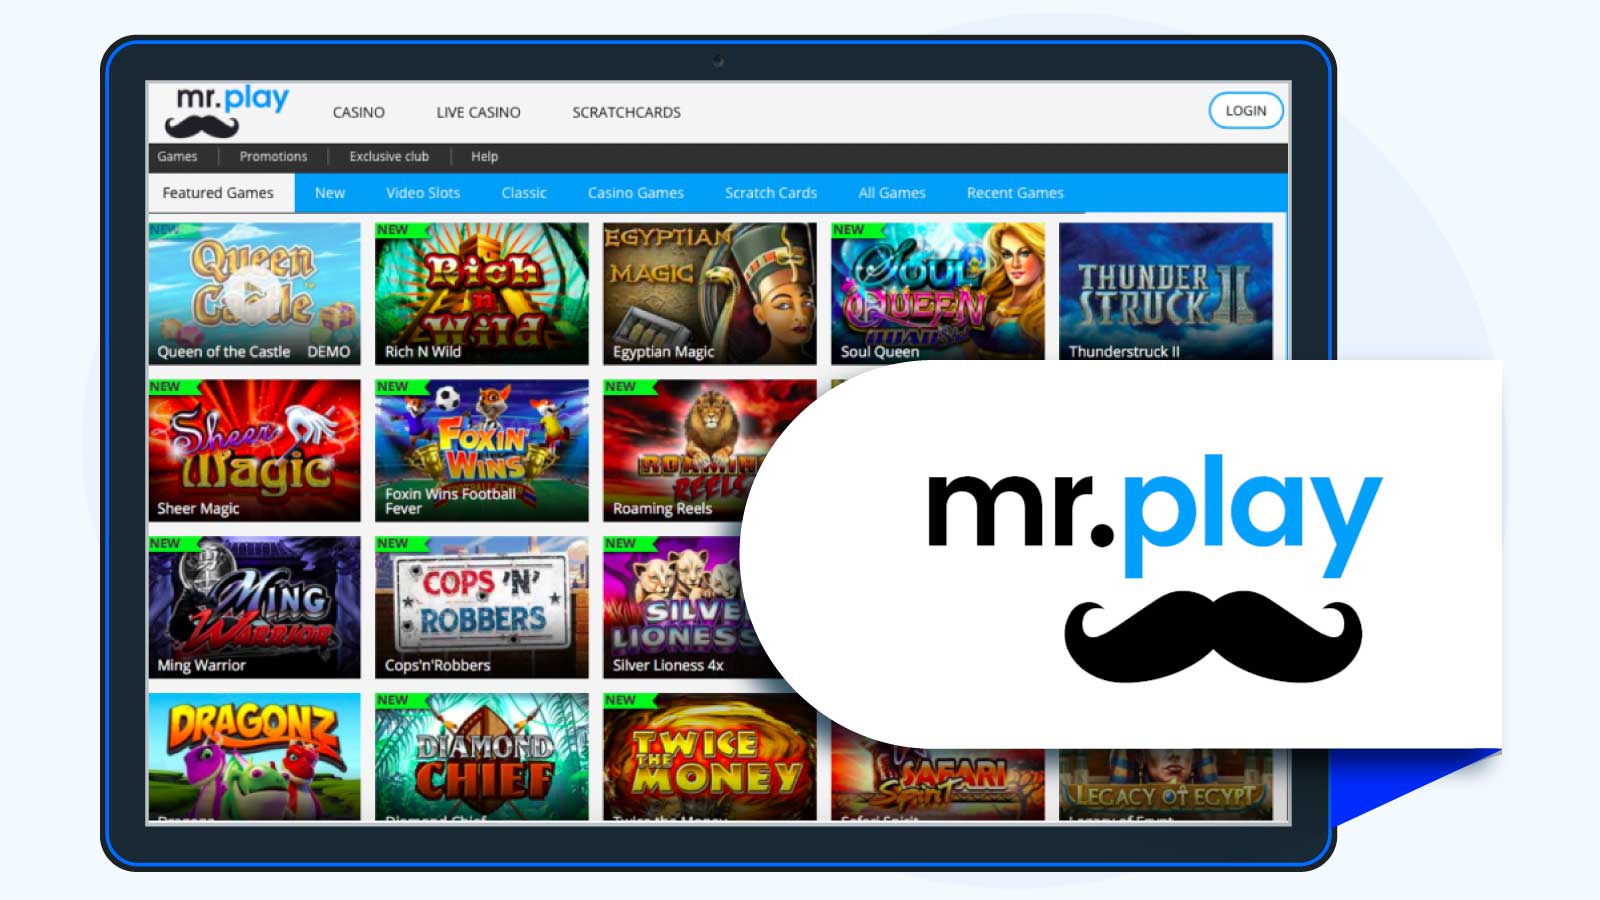 Mr. Play Casino – Best for Low Wagering Bonuses